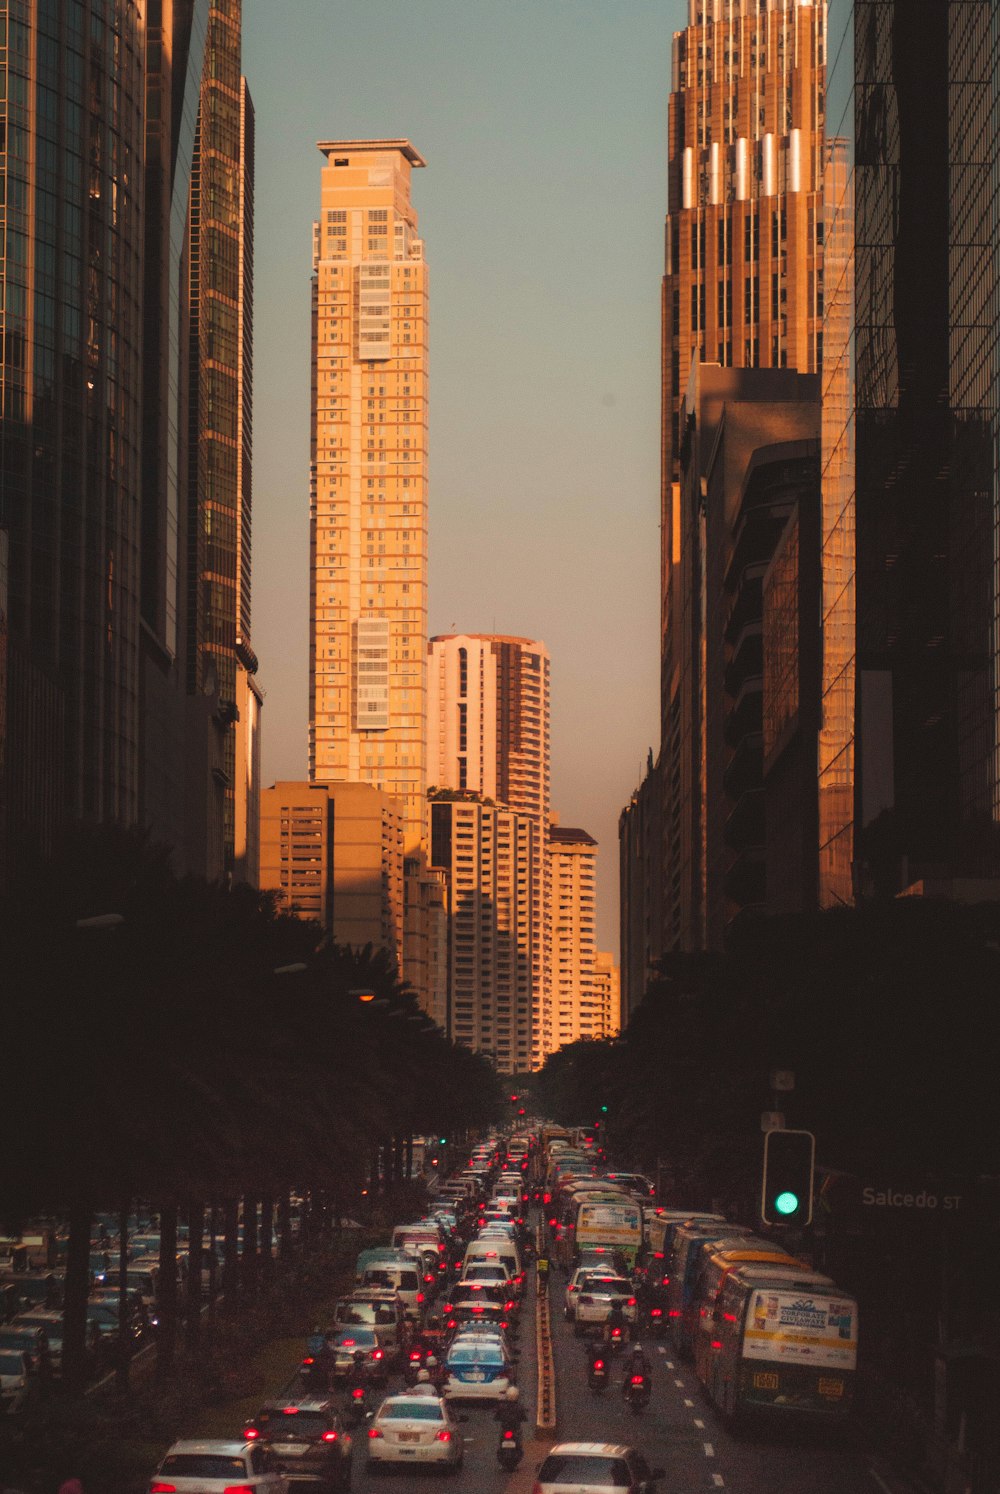 a street filled with lots of traffic next to tall buildings